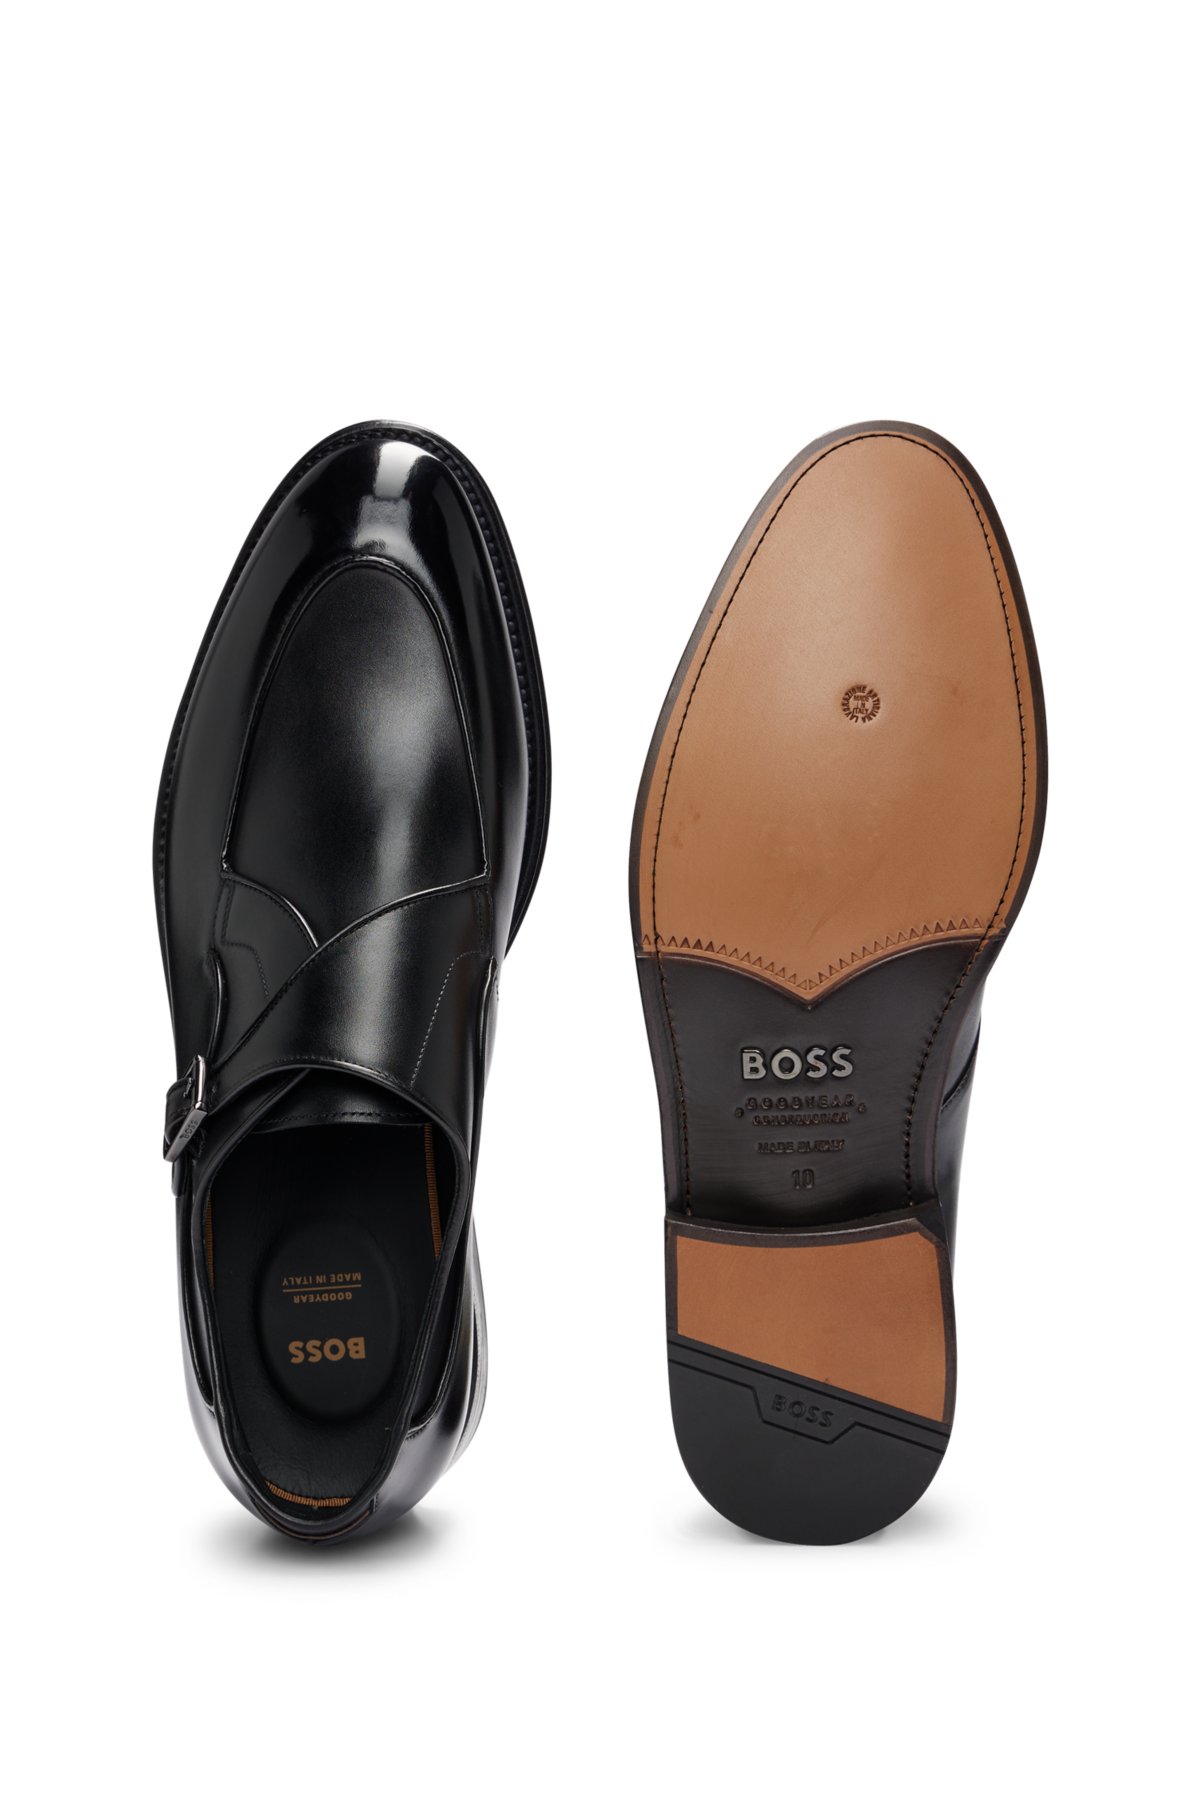 Single-monk shoes in burnished leather, Black